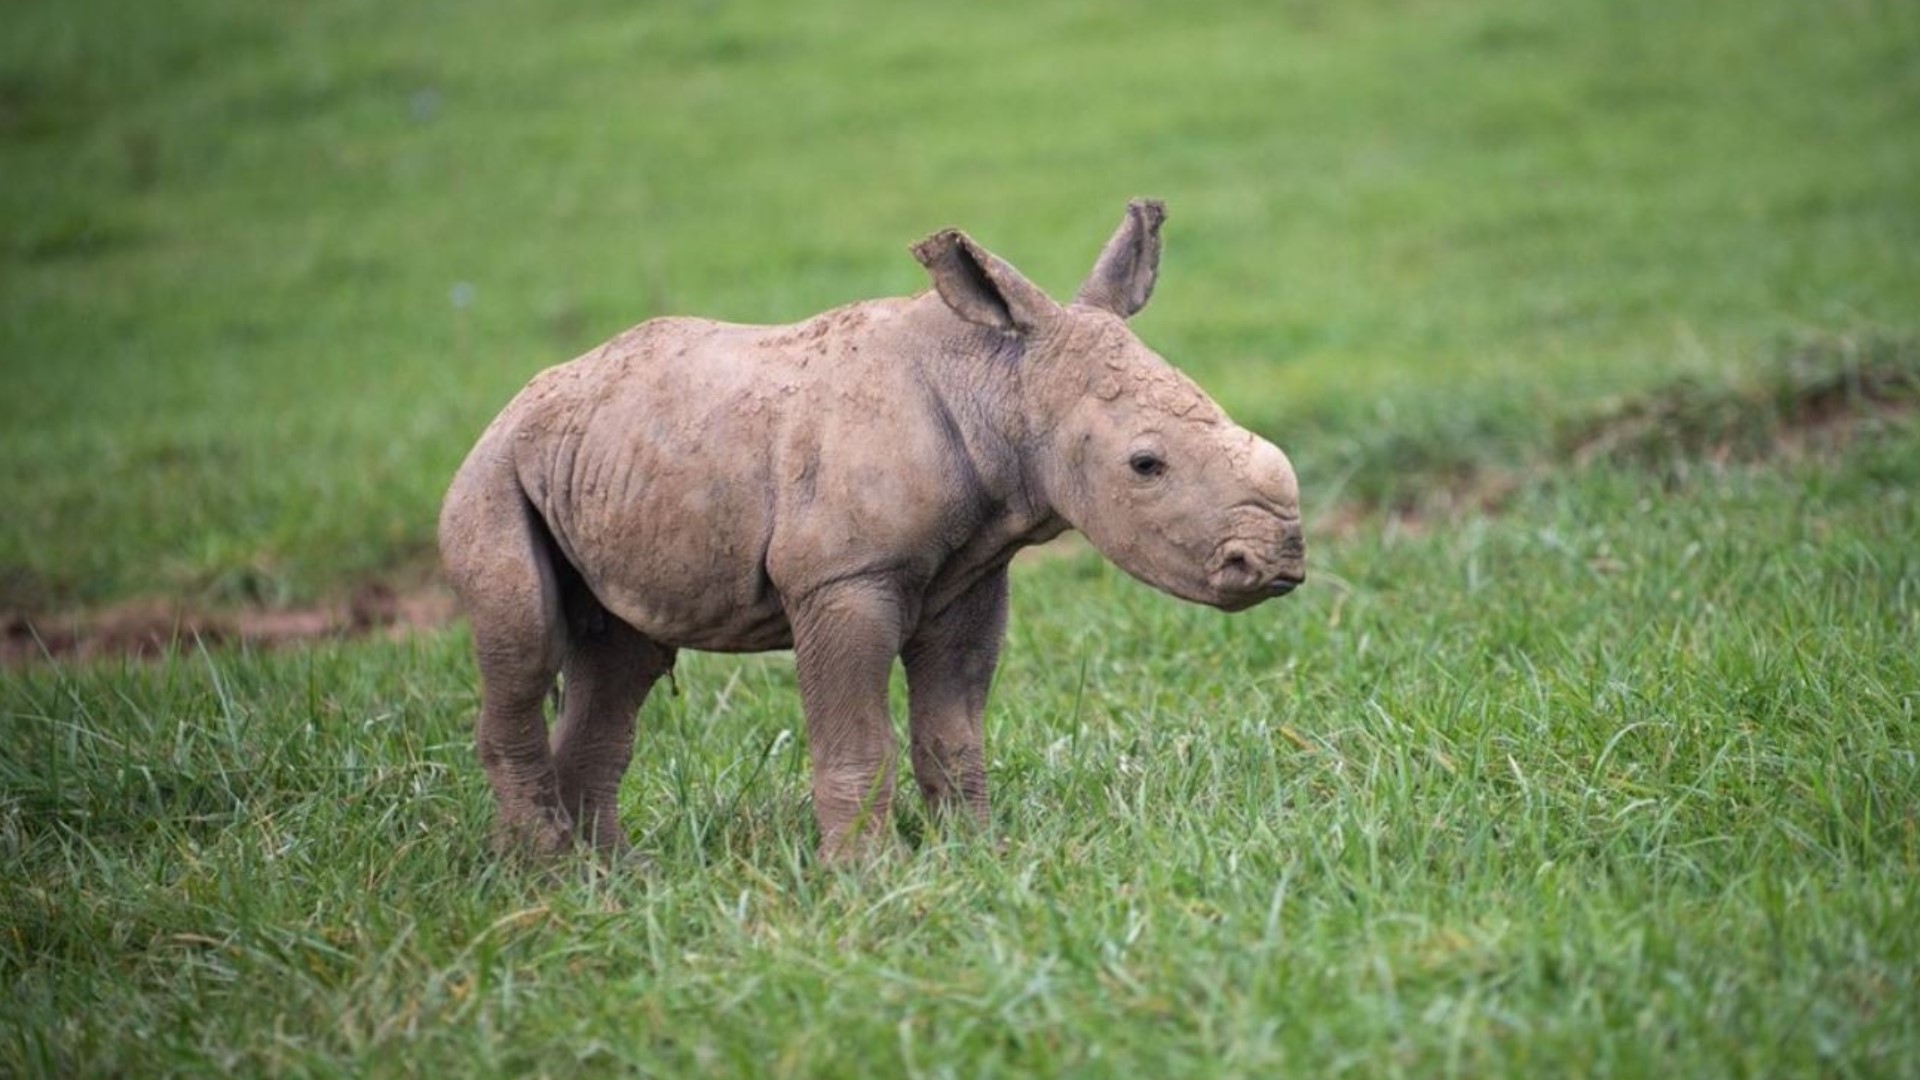 The southern white rhinoceros was born at The Wilds in the early morning hours of Oct. 5.